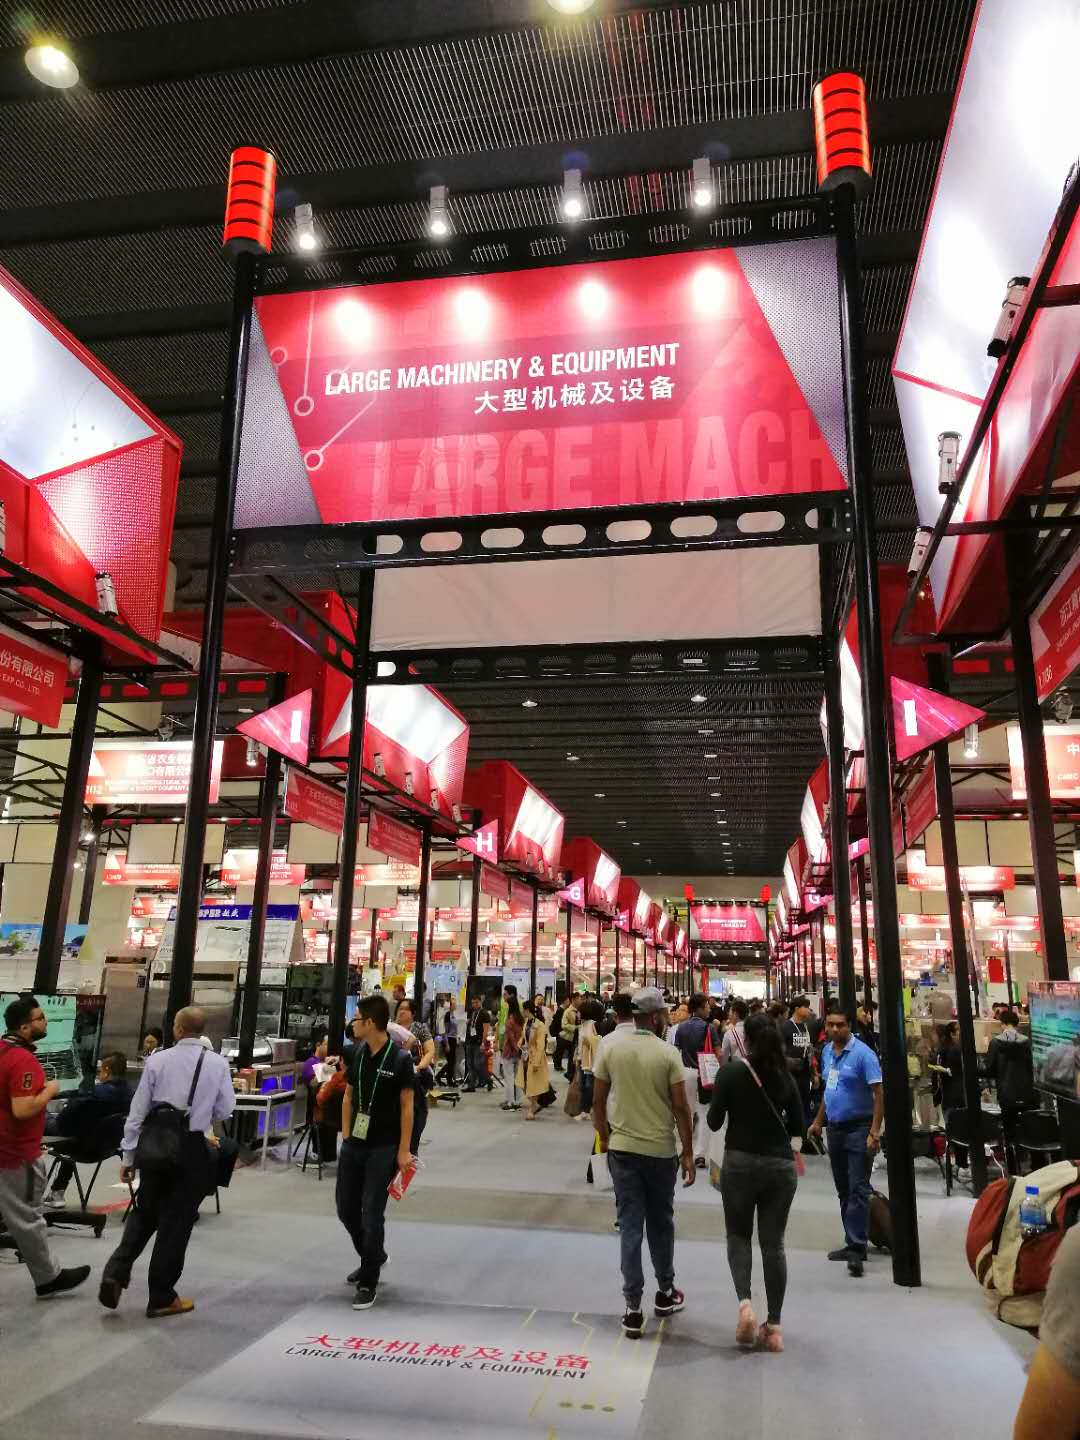 The deep carving CNC delegation went to participate in the Canton Fair, and our company specializes in developing large-scale precision carving machines